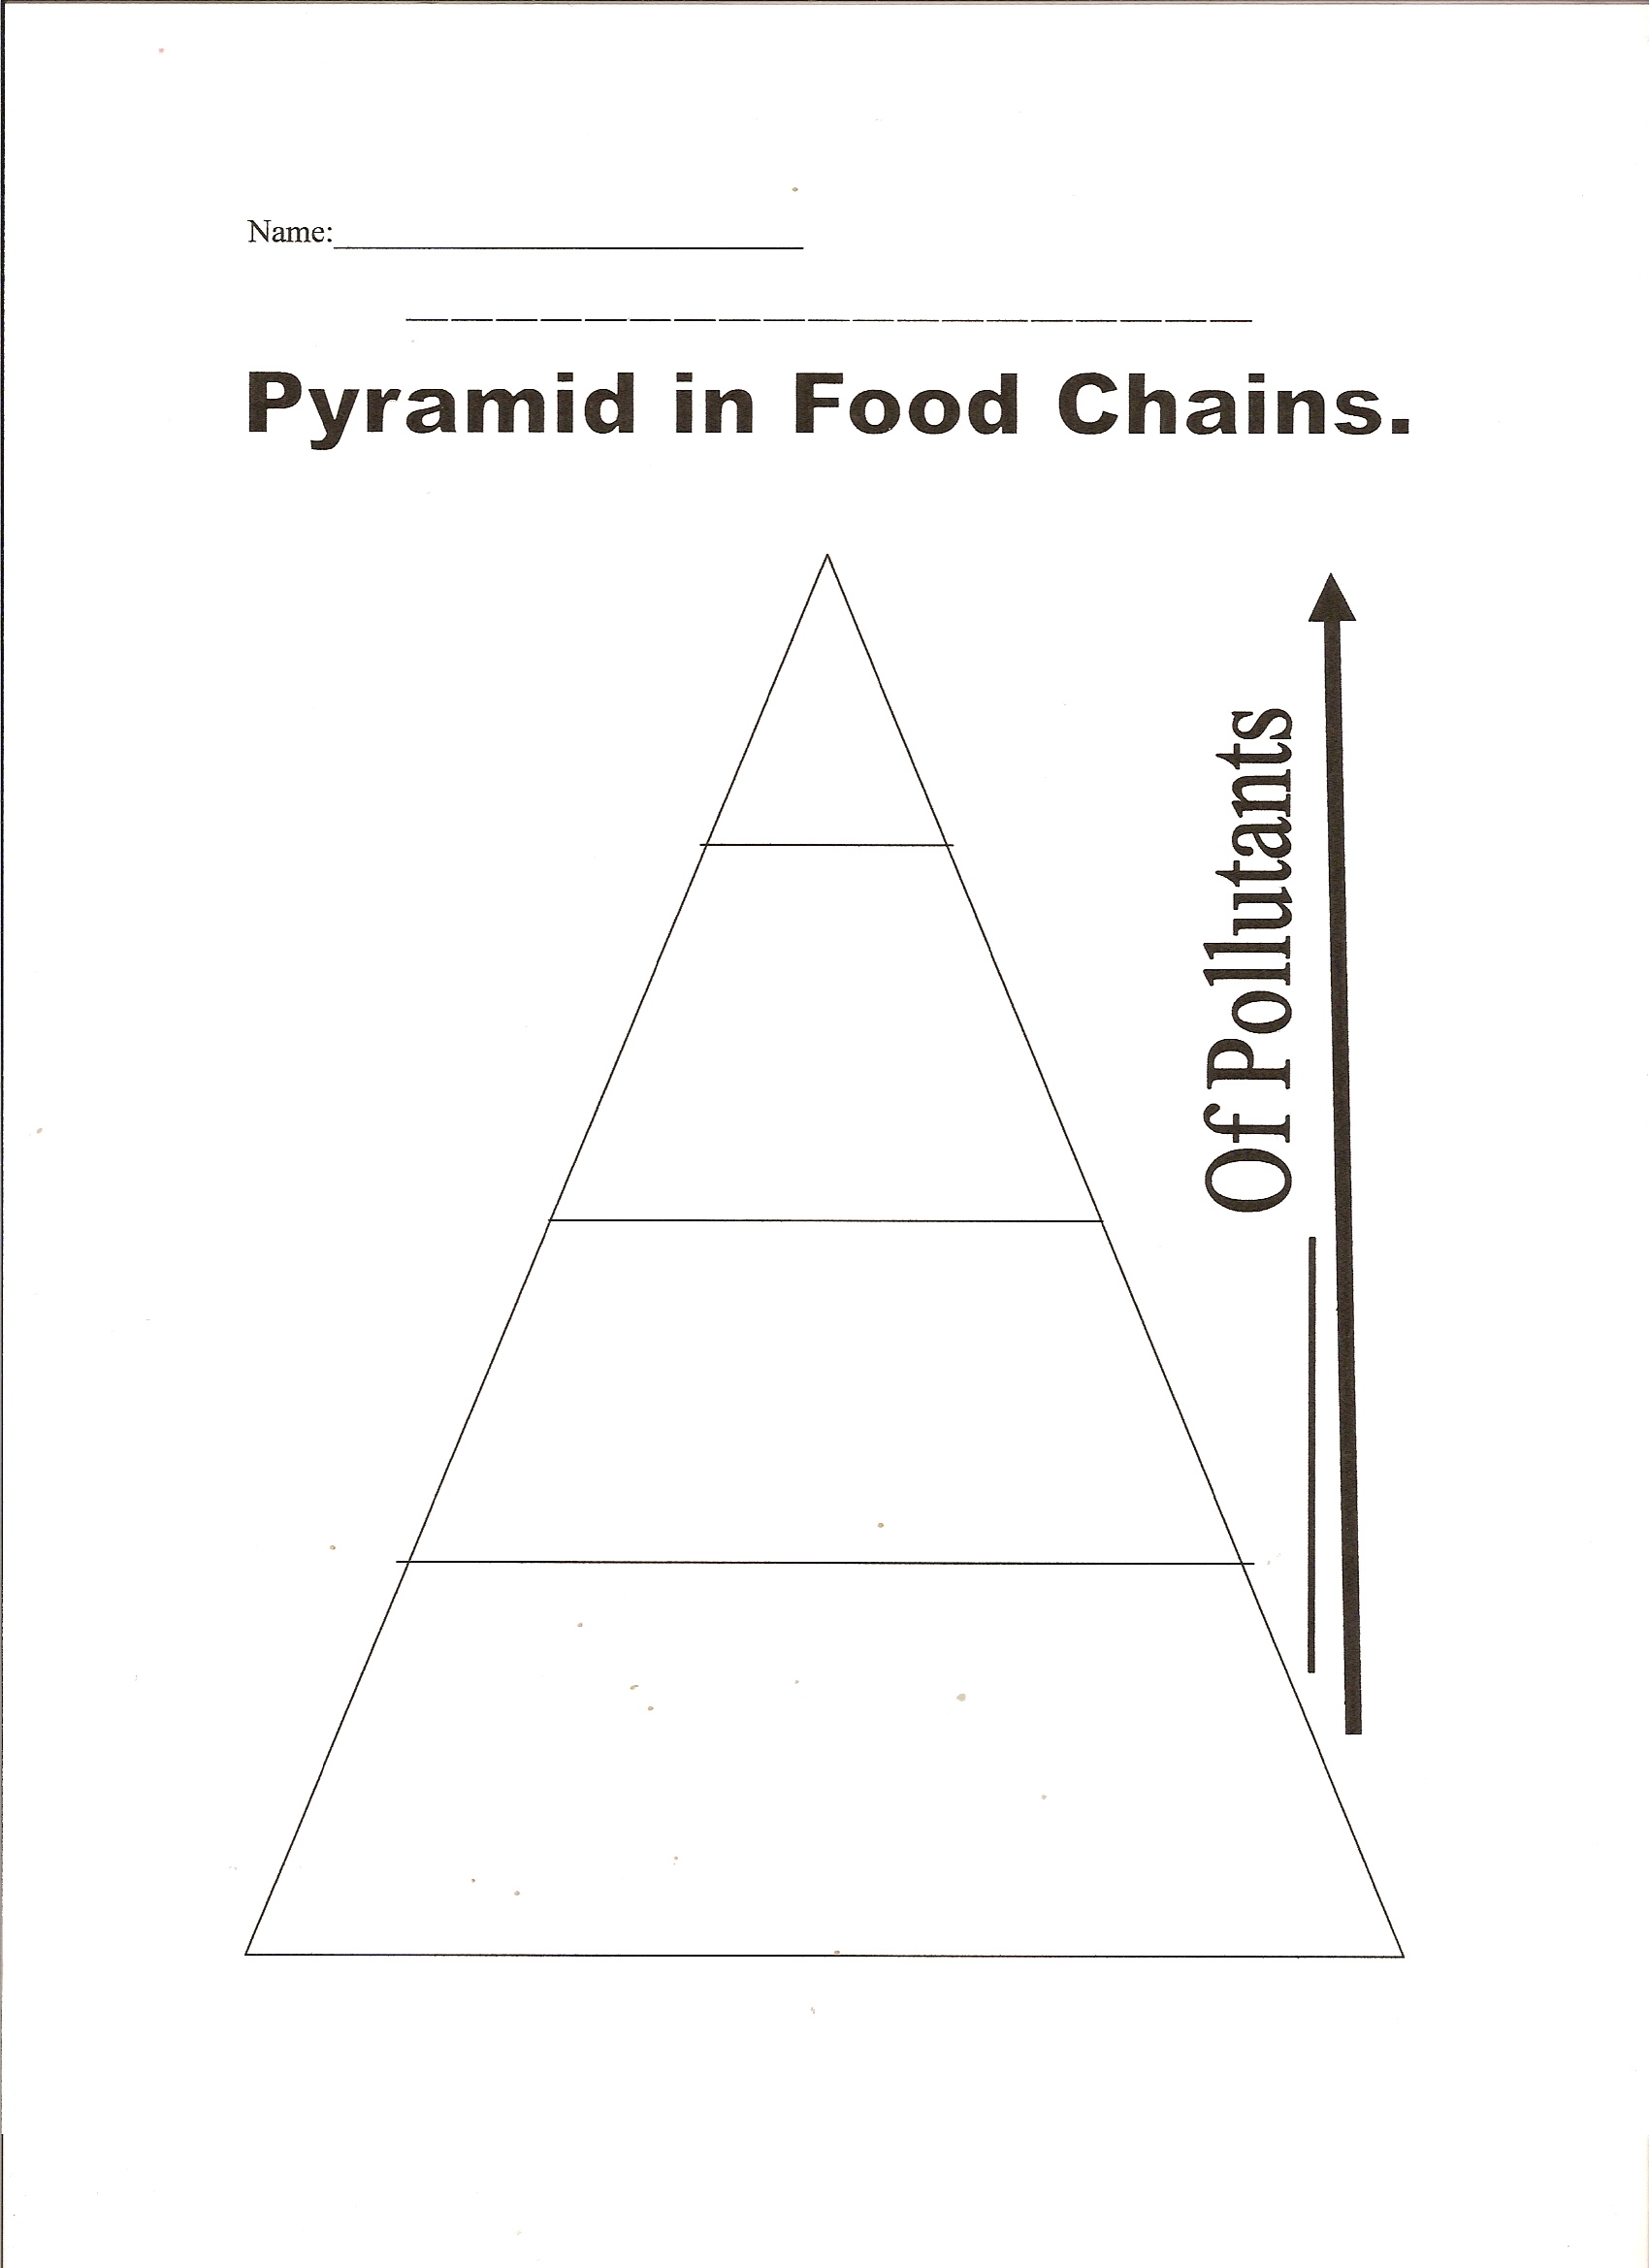 Food chains and webs essays   manyessays.com